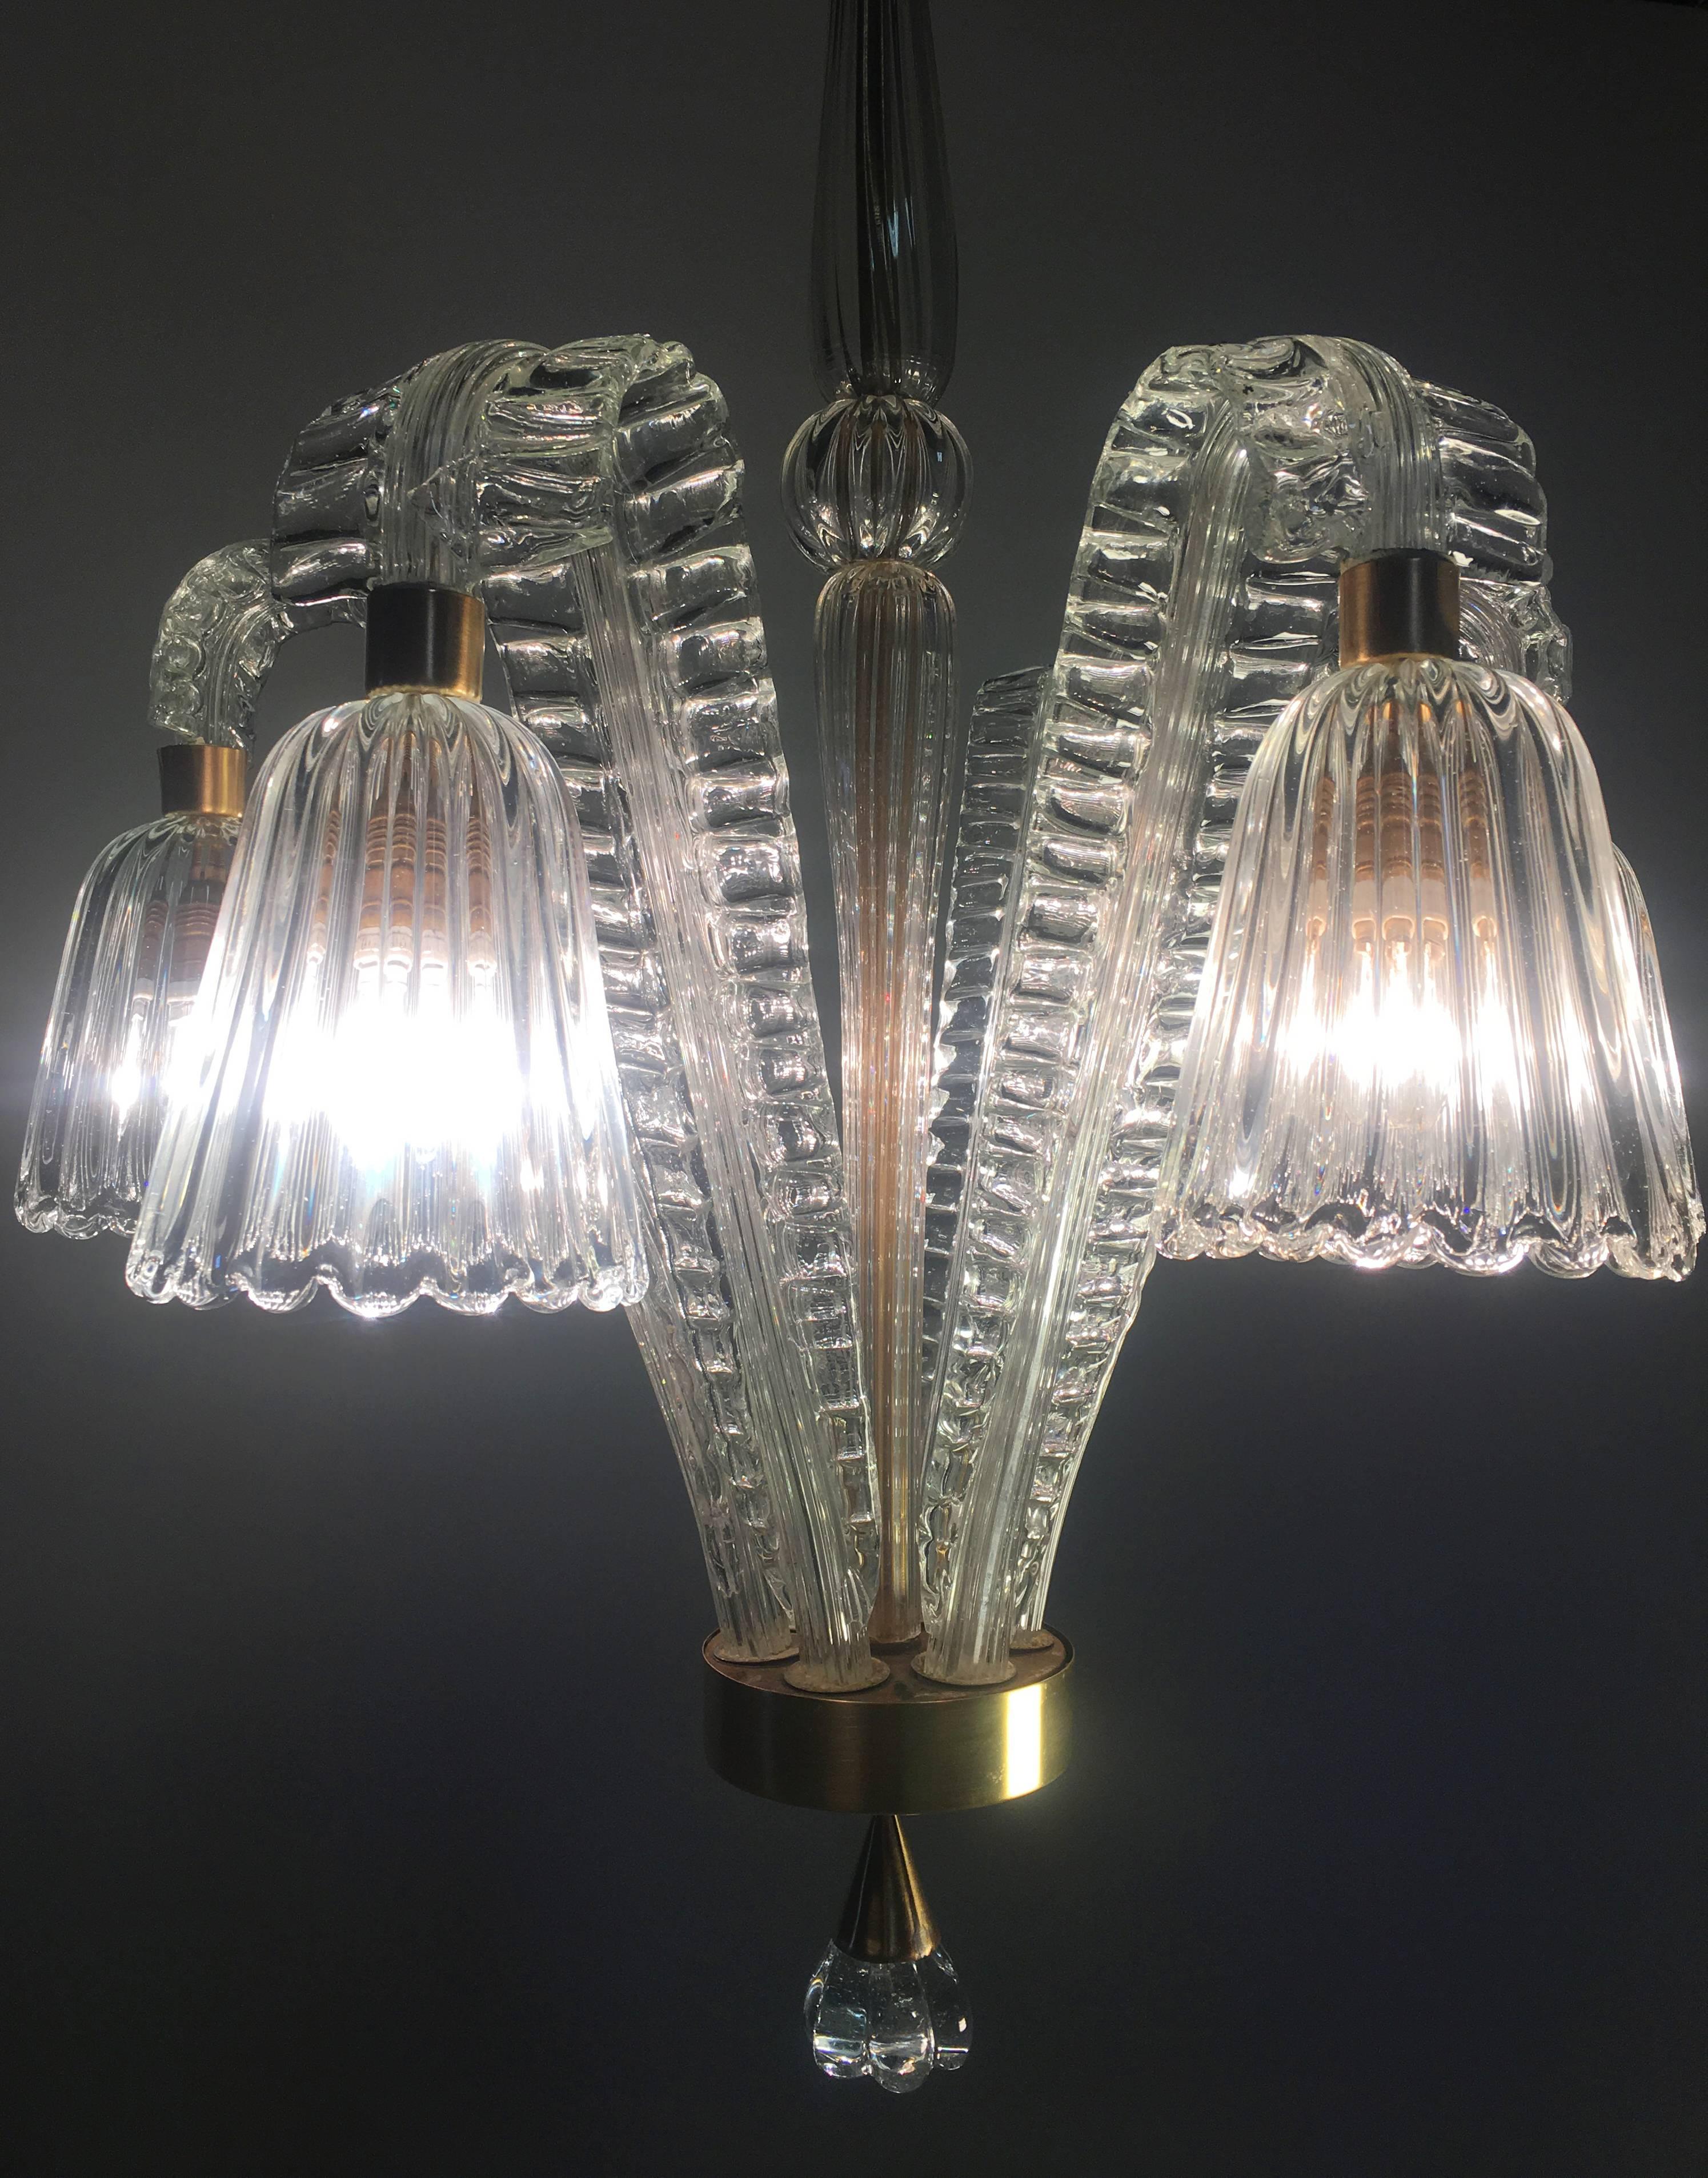 Charming Art Deco Chandelier by Ercole Barovier, Murano, 1940s For Sale 1